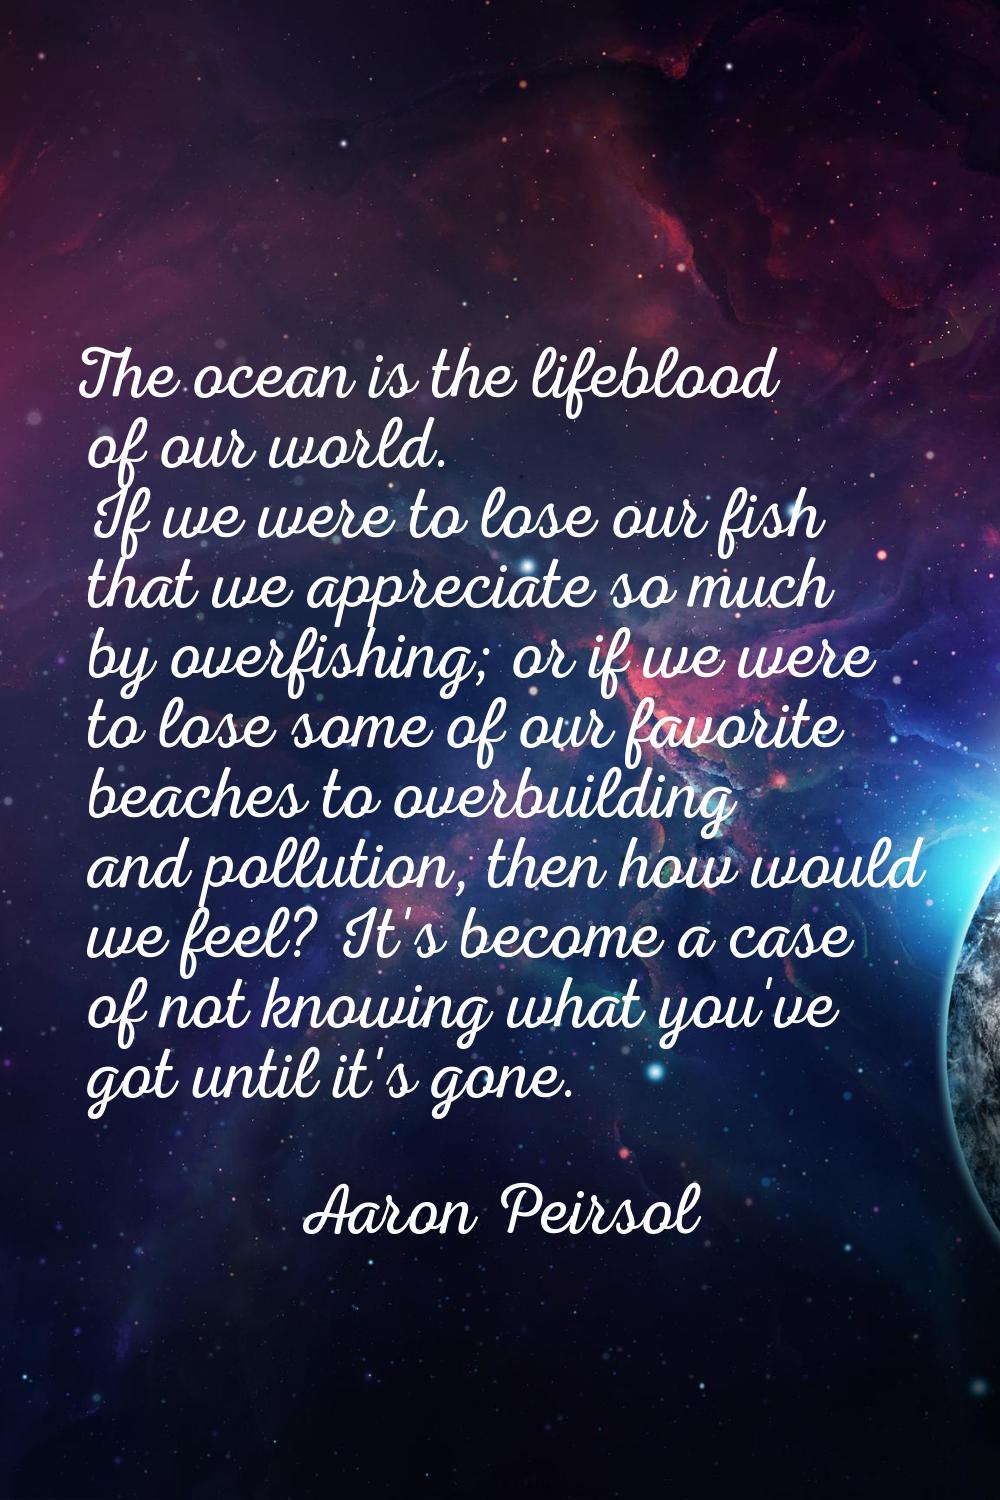 The ocean is the lifeblood of our world. If we were to lose our fish that we appreciate so much by 